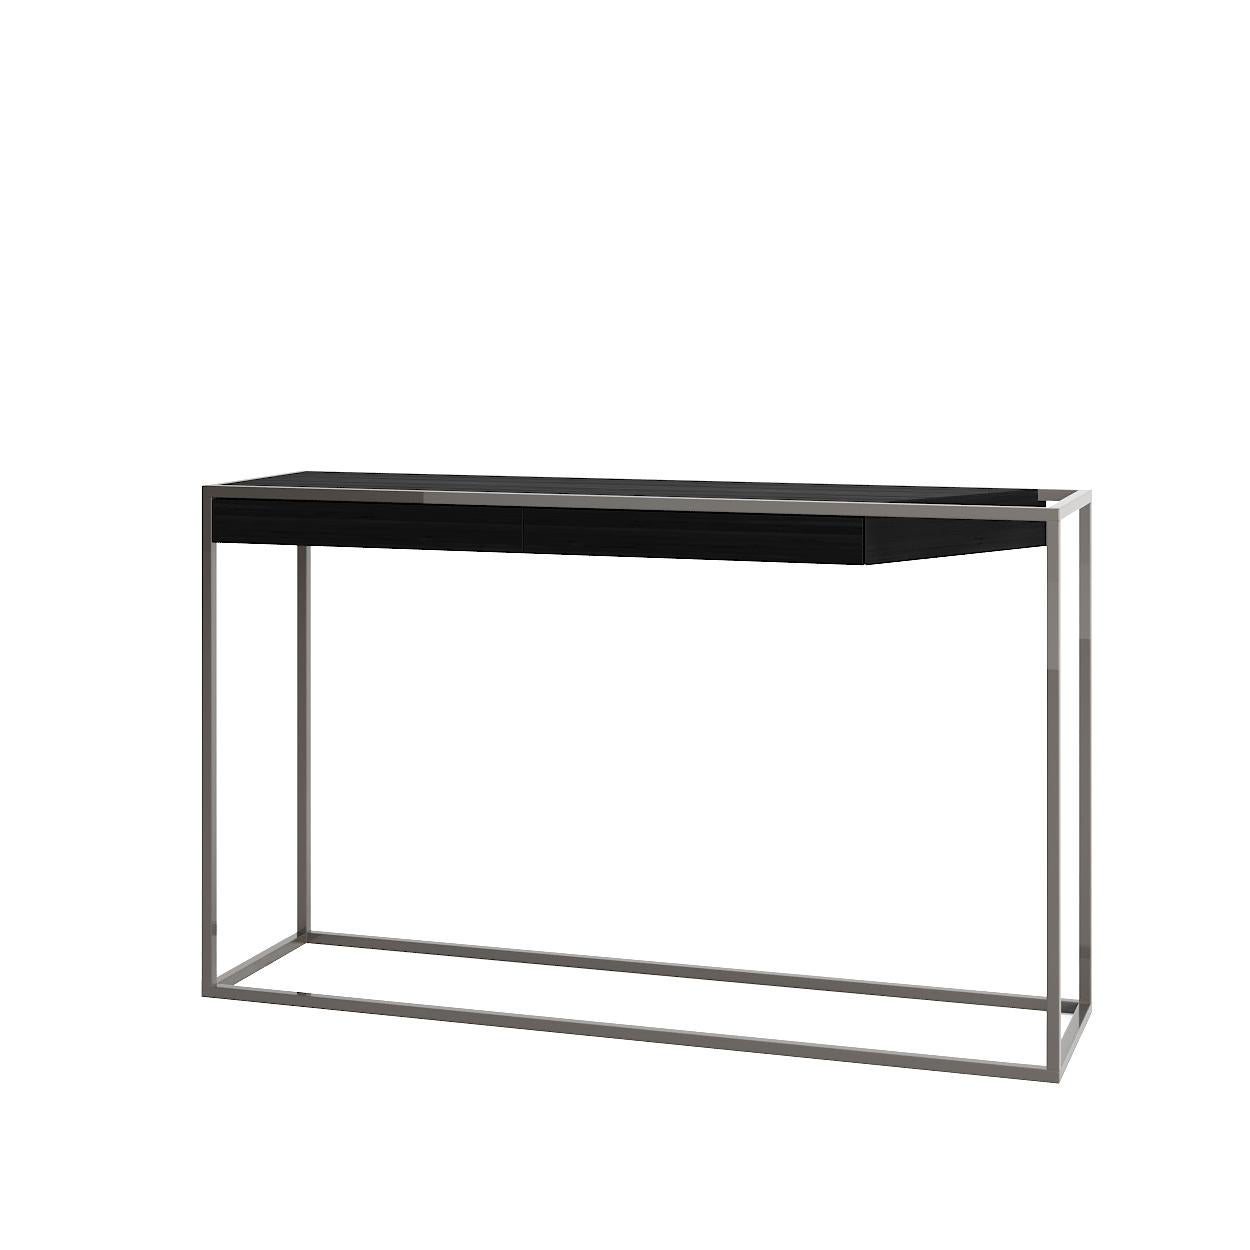 Portuguese Modern Minimalist Rectangular Console Table Black Oak Wood and Black Lacquer For Sale